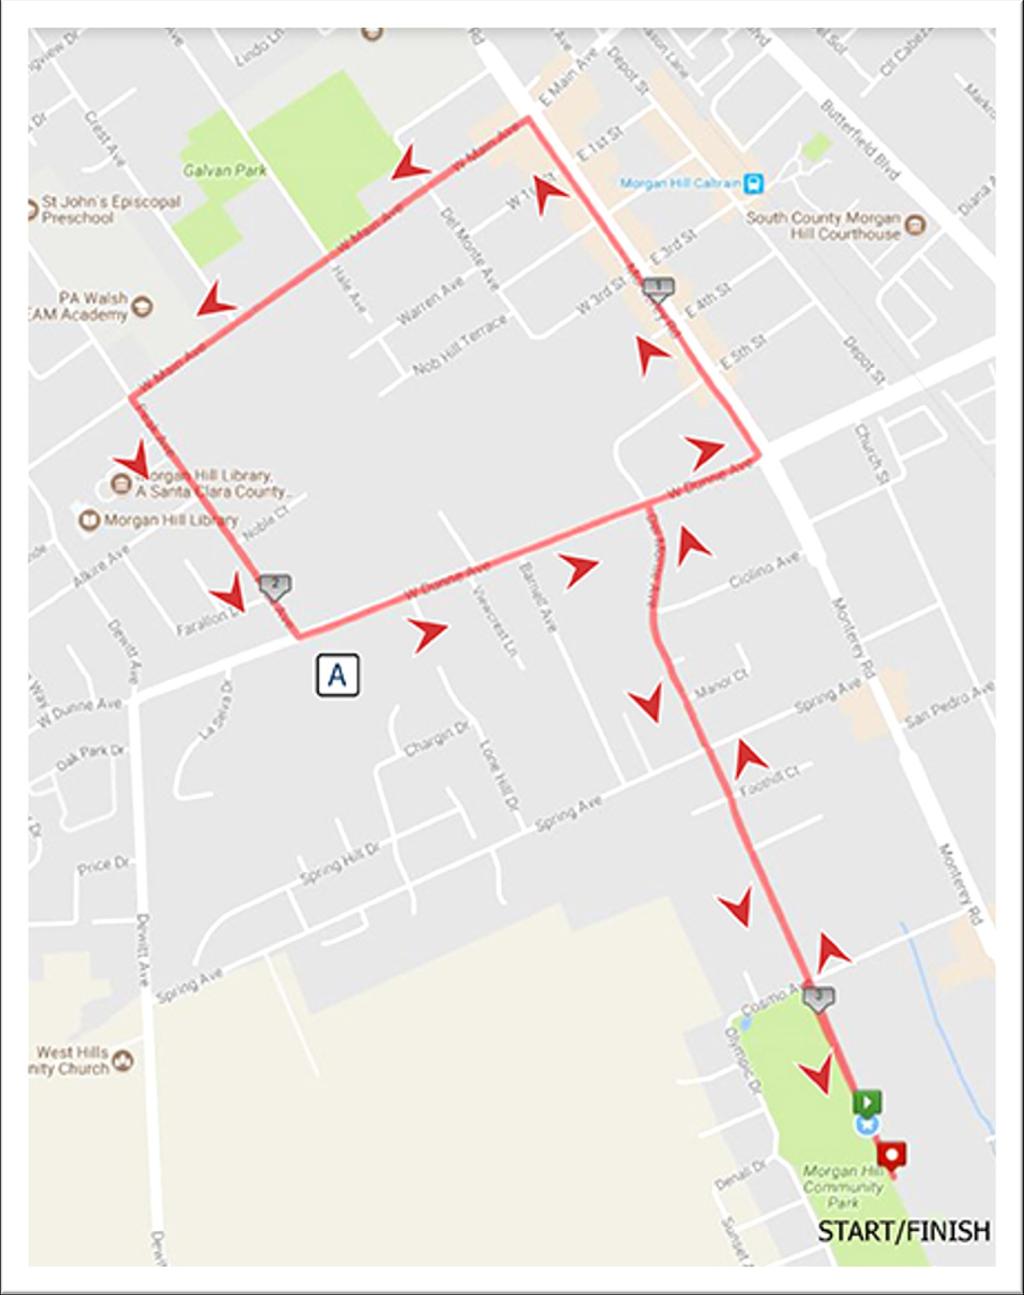 5K COURSE MAP (3.